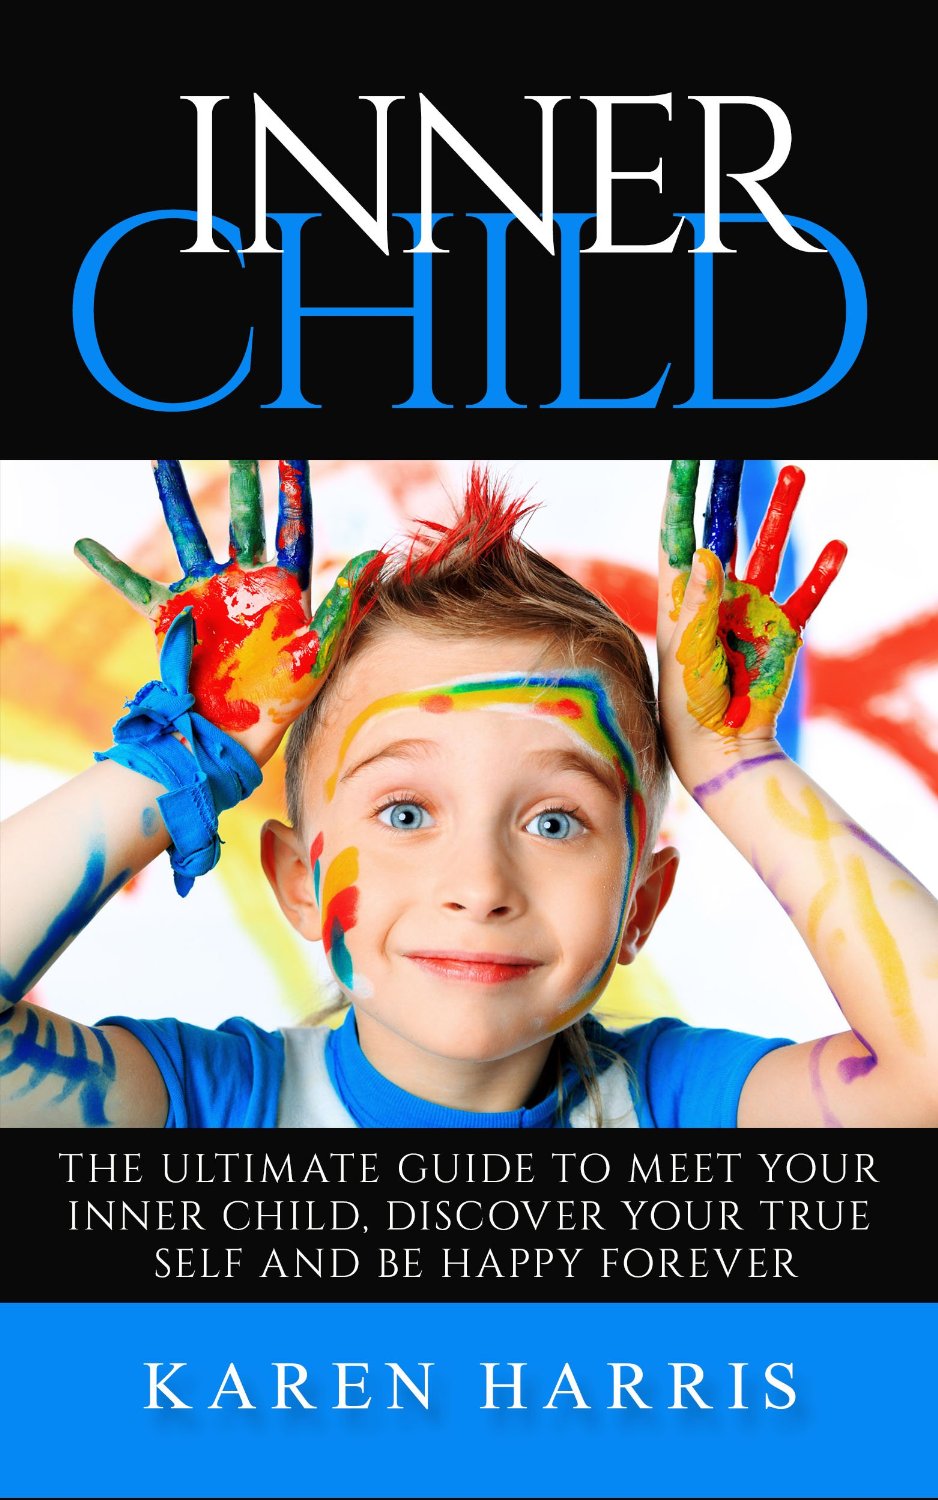 FREE: vInner Child: The Ultimate Guide to Meet your Inner Child, Discover your True Self and Be Happy Forever by Karen Harris